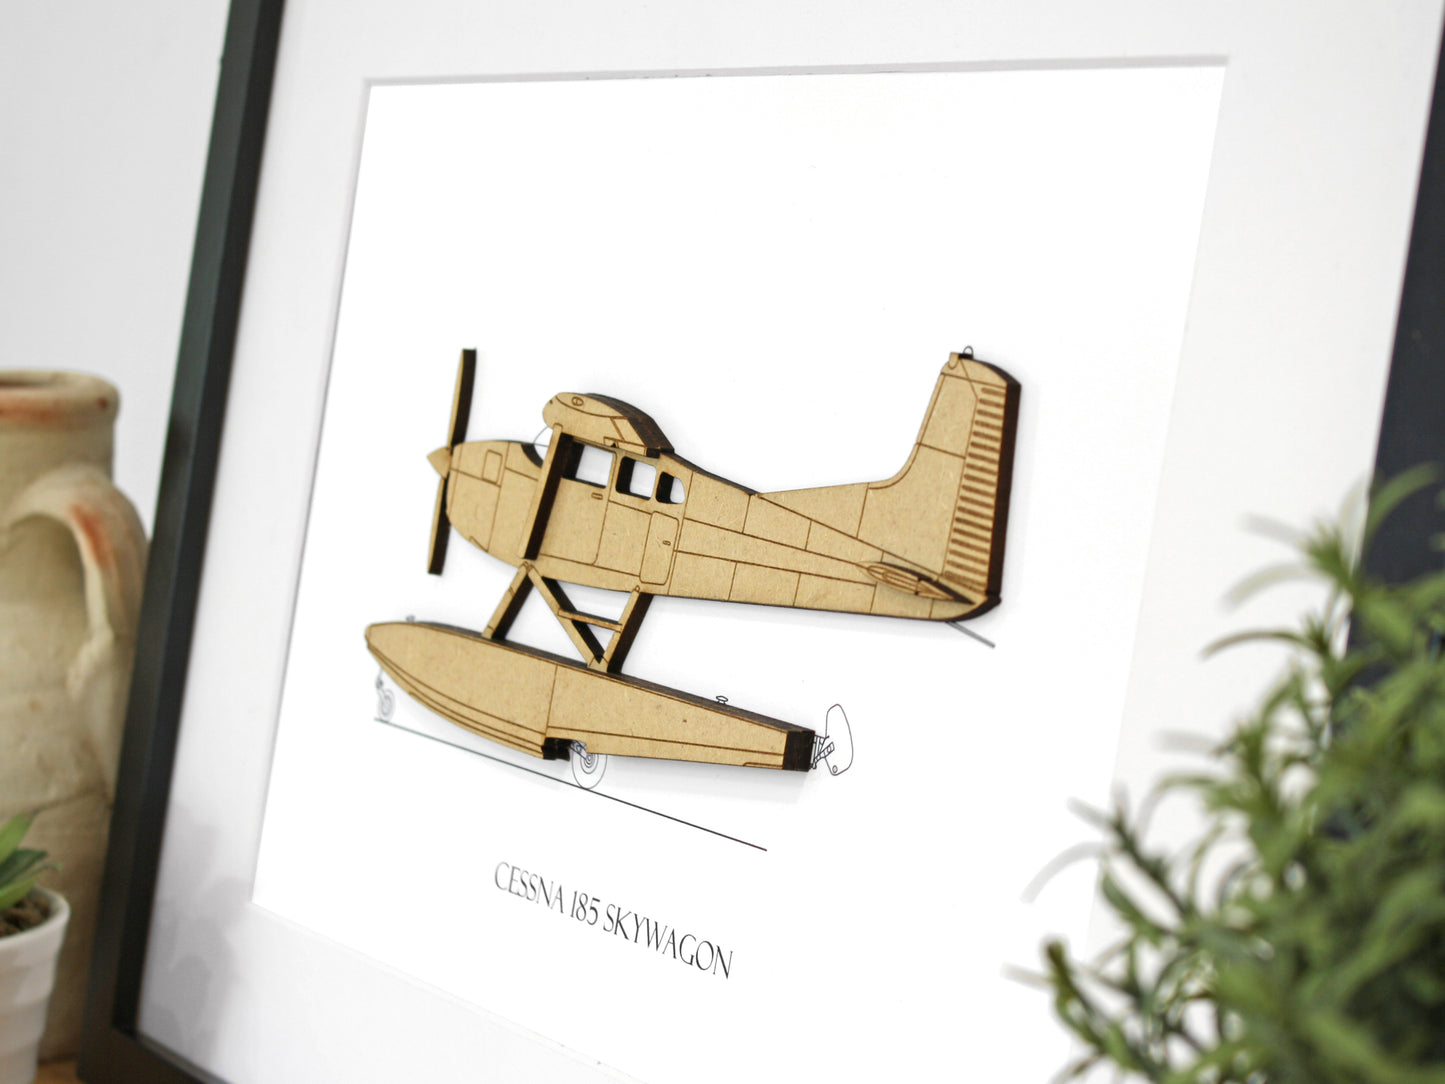 Cessna 185 seaplane gifts